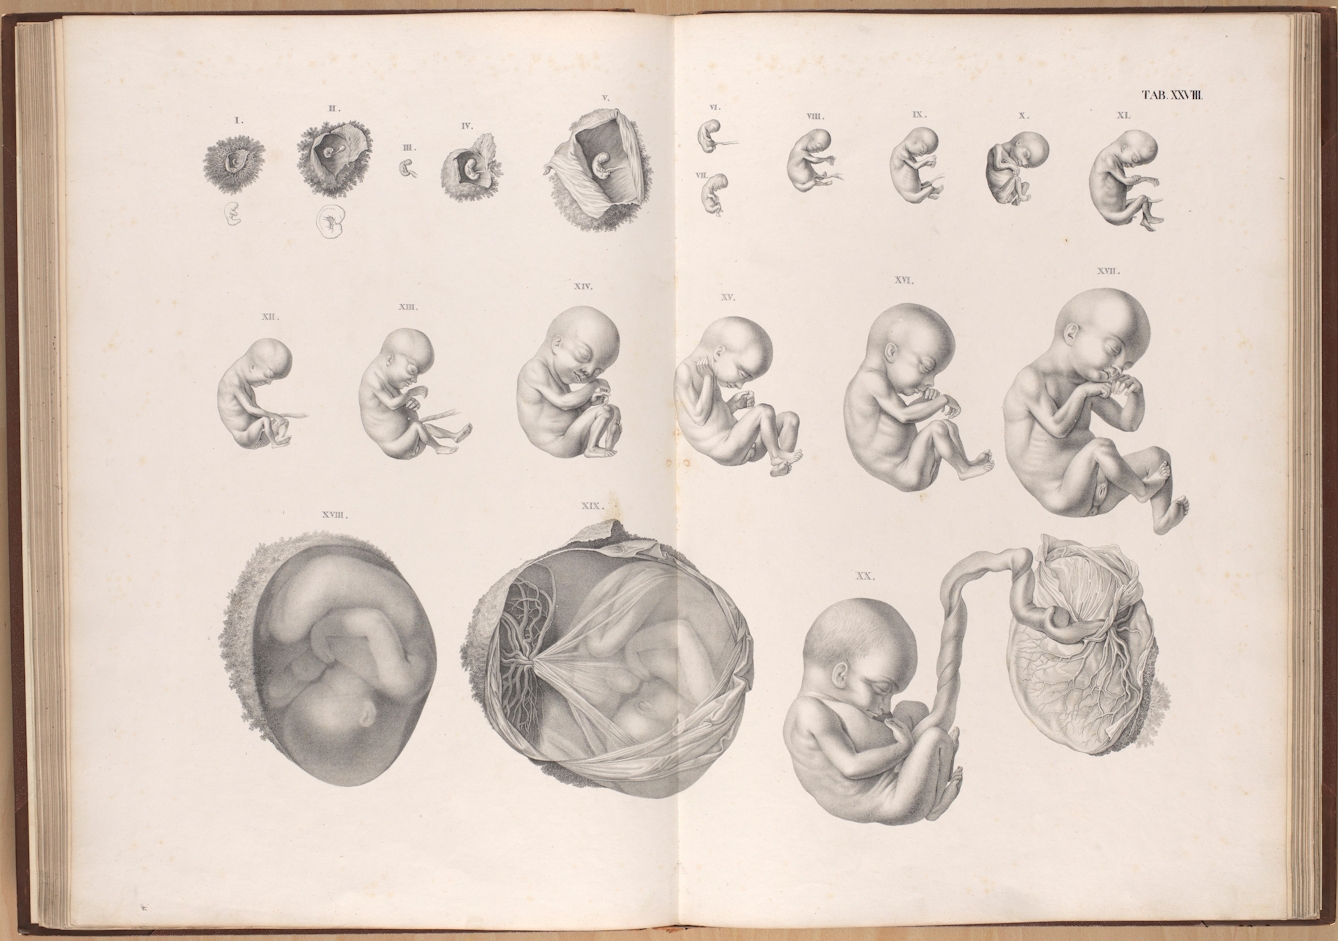 Photograph of a double page spread inside a book. The pages show 20 black and white illustrations of a developing human foetus.